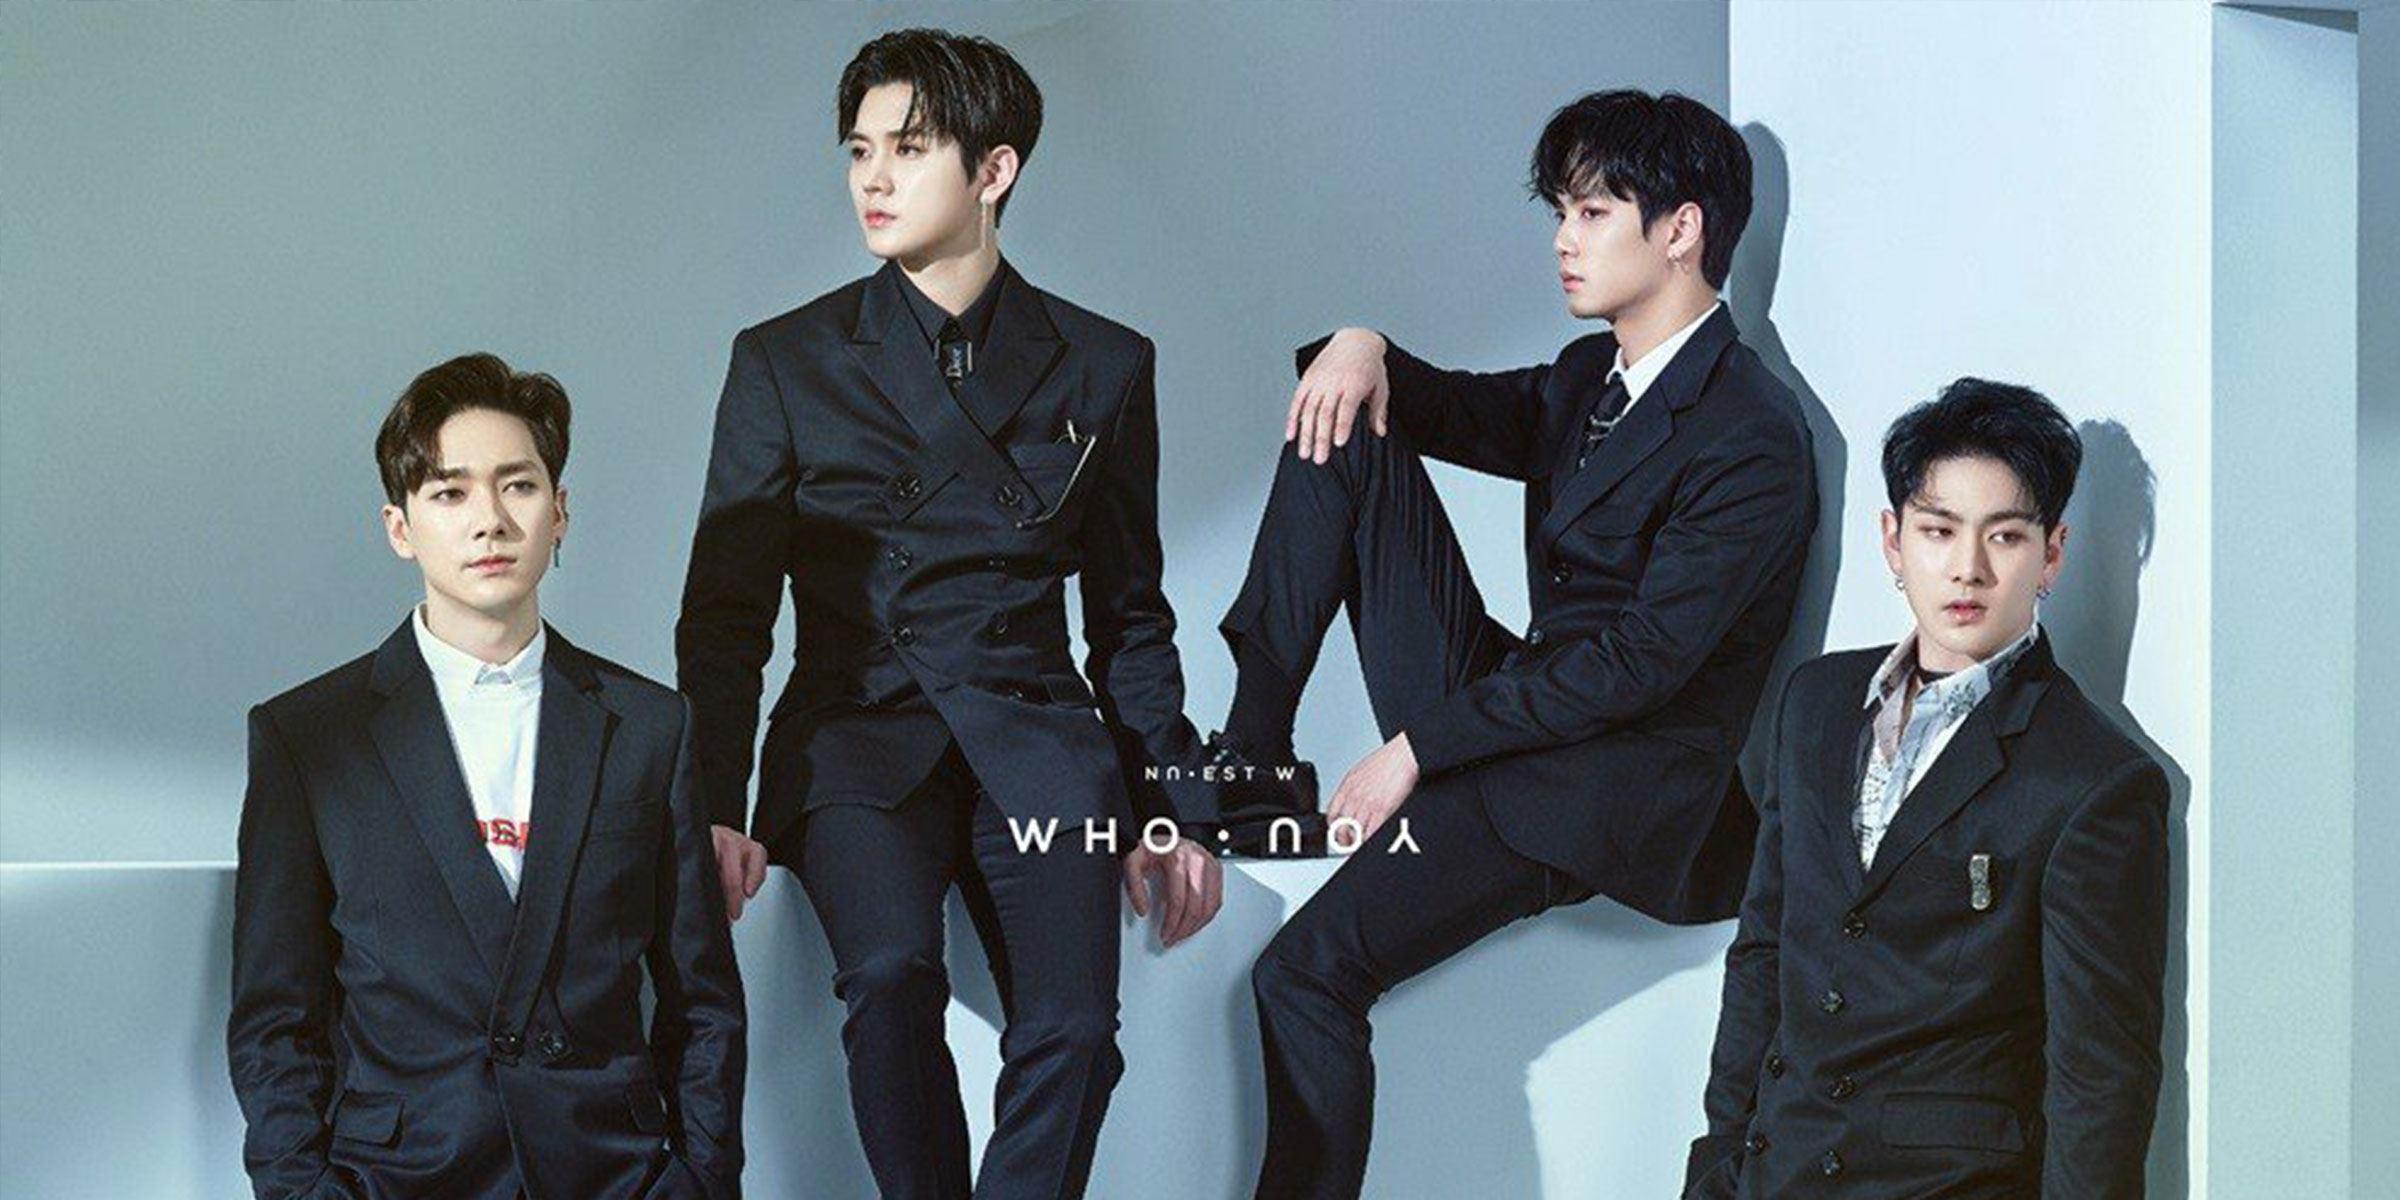 Nu Est W Is Back With Deja Vu The Kraze Deja vu, i've just been in this time before higher on the beat, and i know it's a place to go calling you and the search is a mystery standing on my feet, it's so hard when i try to be me, yeah. nu est w is back with deja vu the